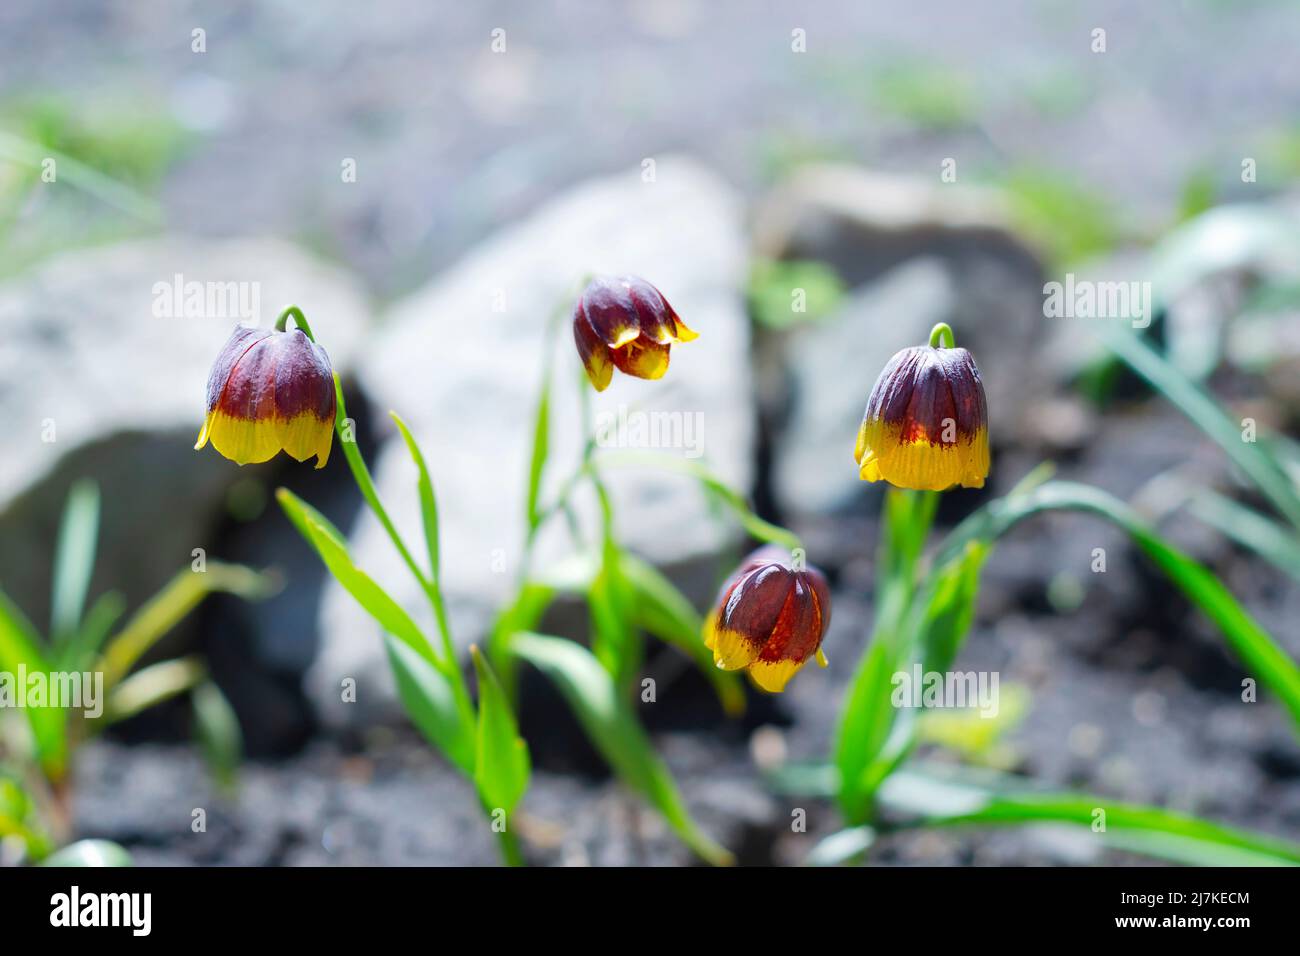 Close-up of the flower of the Mikhailovsky Fritillary, with bell-shaped maroon flowers with yellow tips blooming in spring Stock Photo